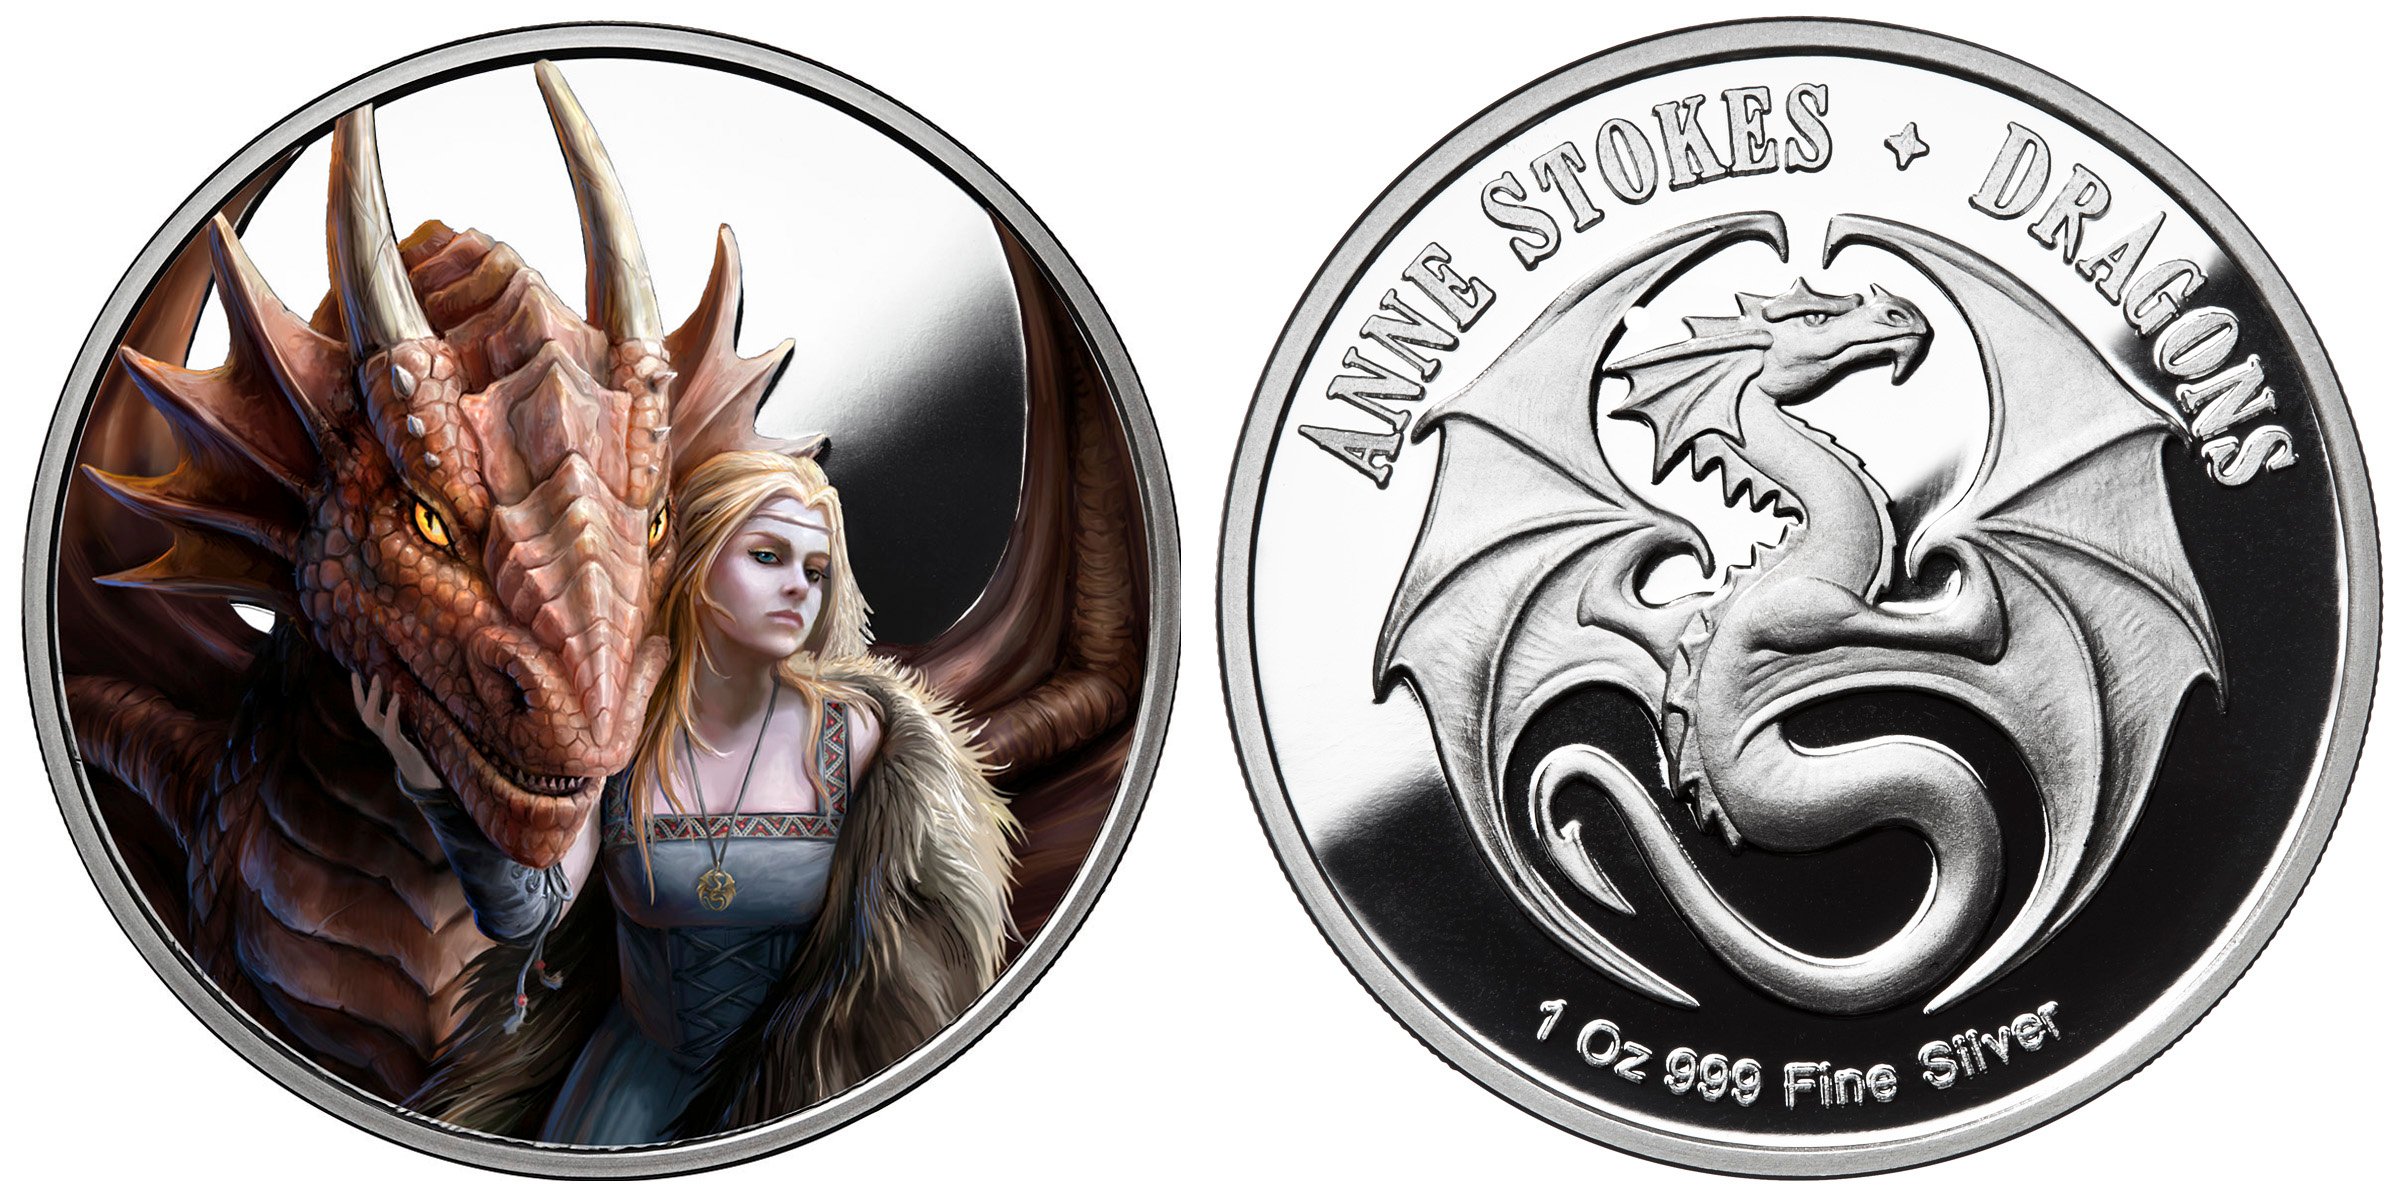 SKU#169632 Friend or Foe 1 oz Silver Colorized Round Anne Stokes Dragons